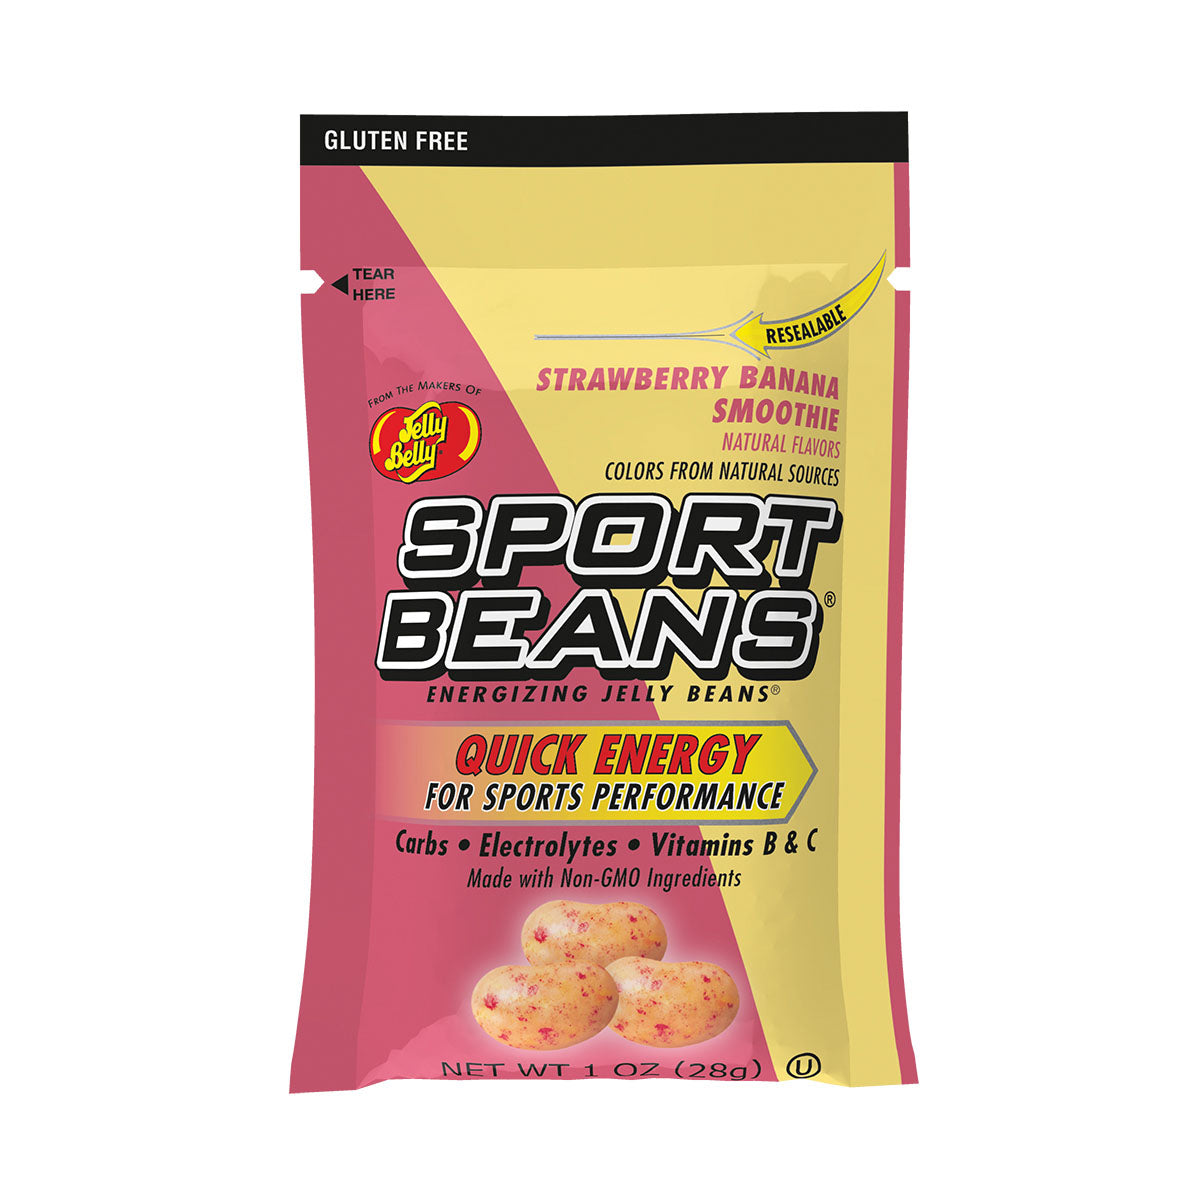 JELLY BELLY JELLY BELLY BEANS STRAWBERRY BANANA SMOOTHIE